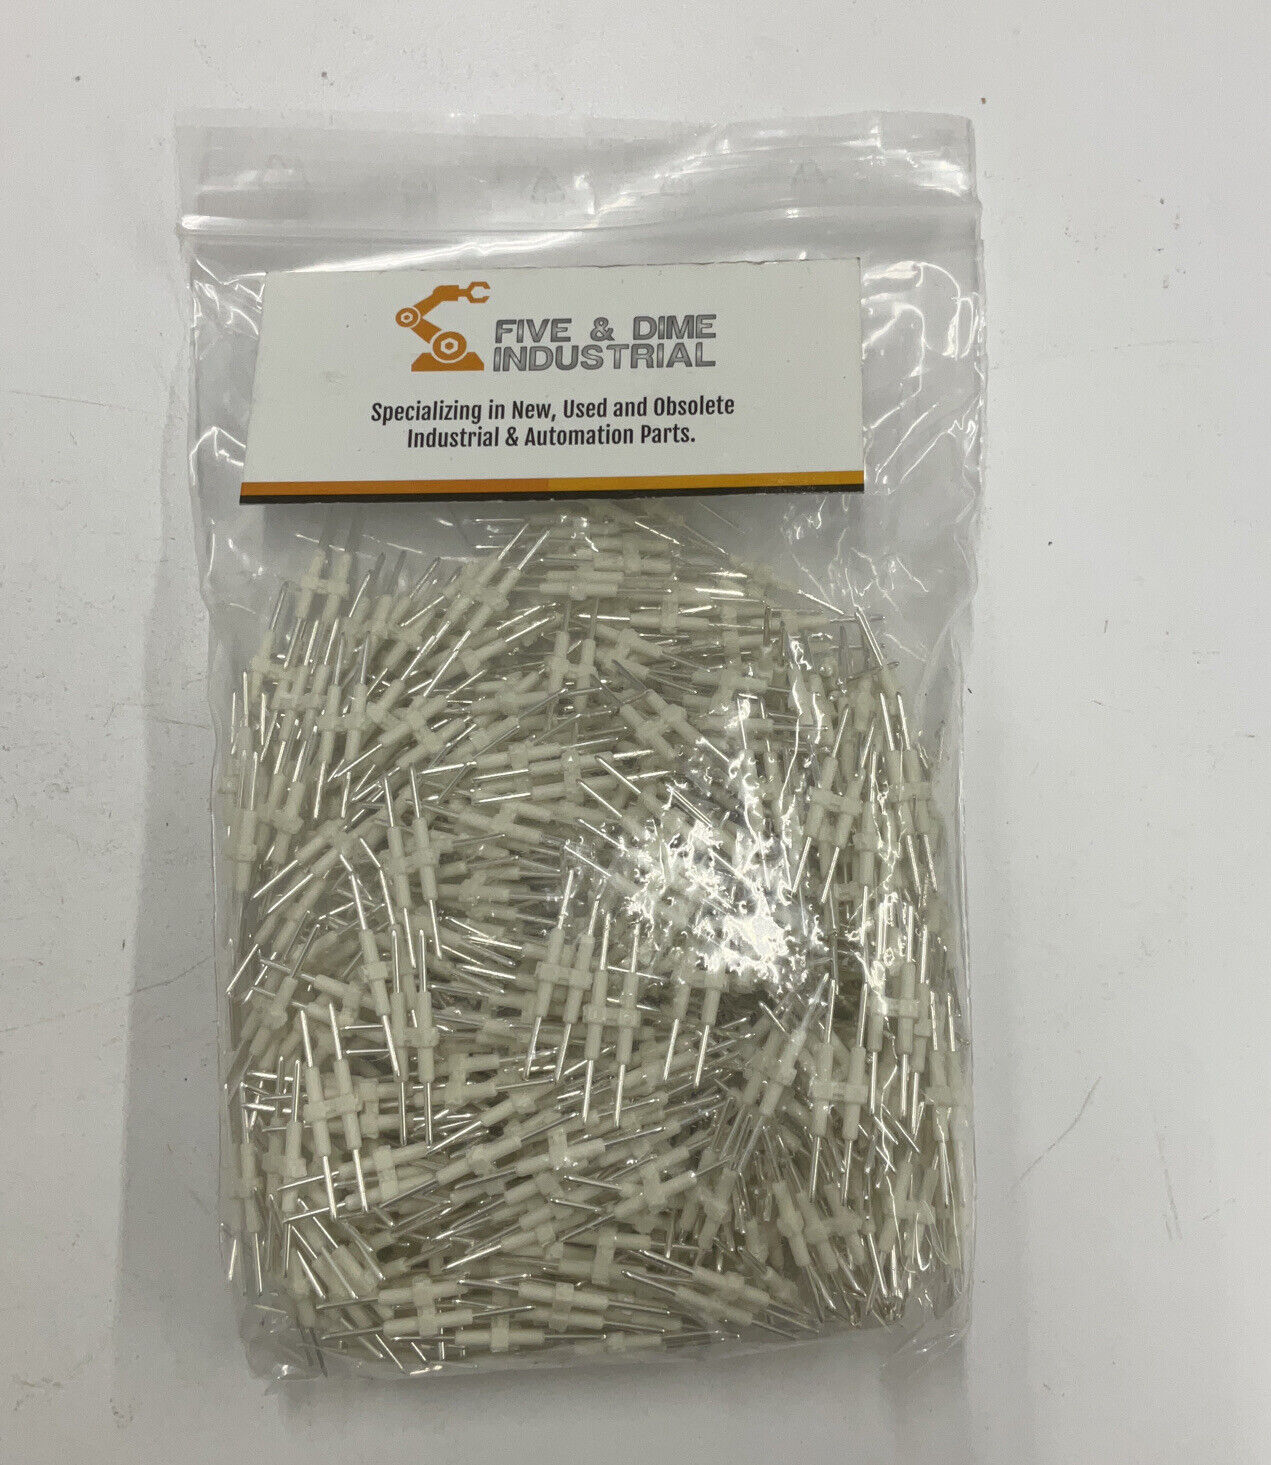 Wago 500 pcs  2060-952/028-000 New Board to Board Link Pins 60262837 (CL341)